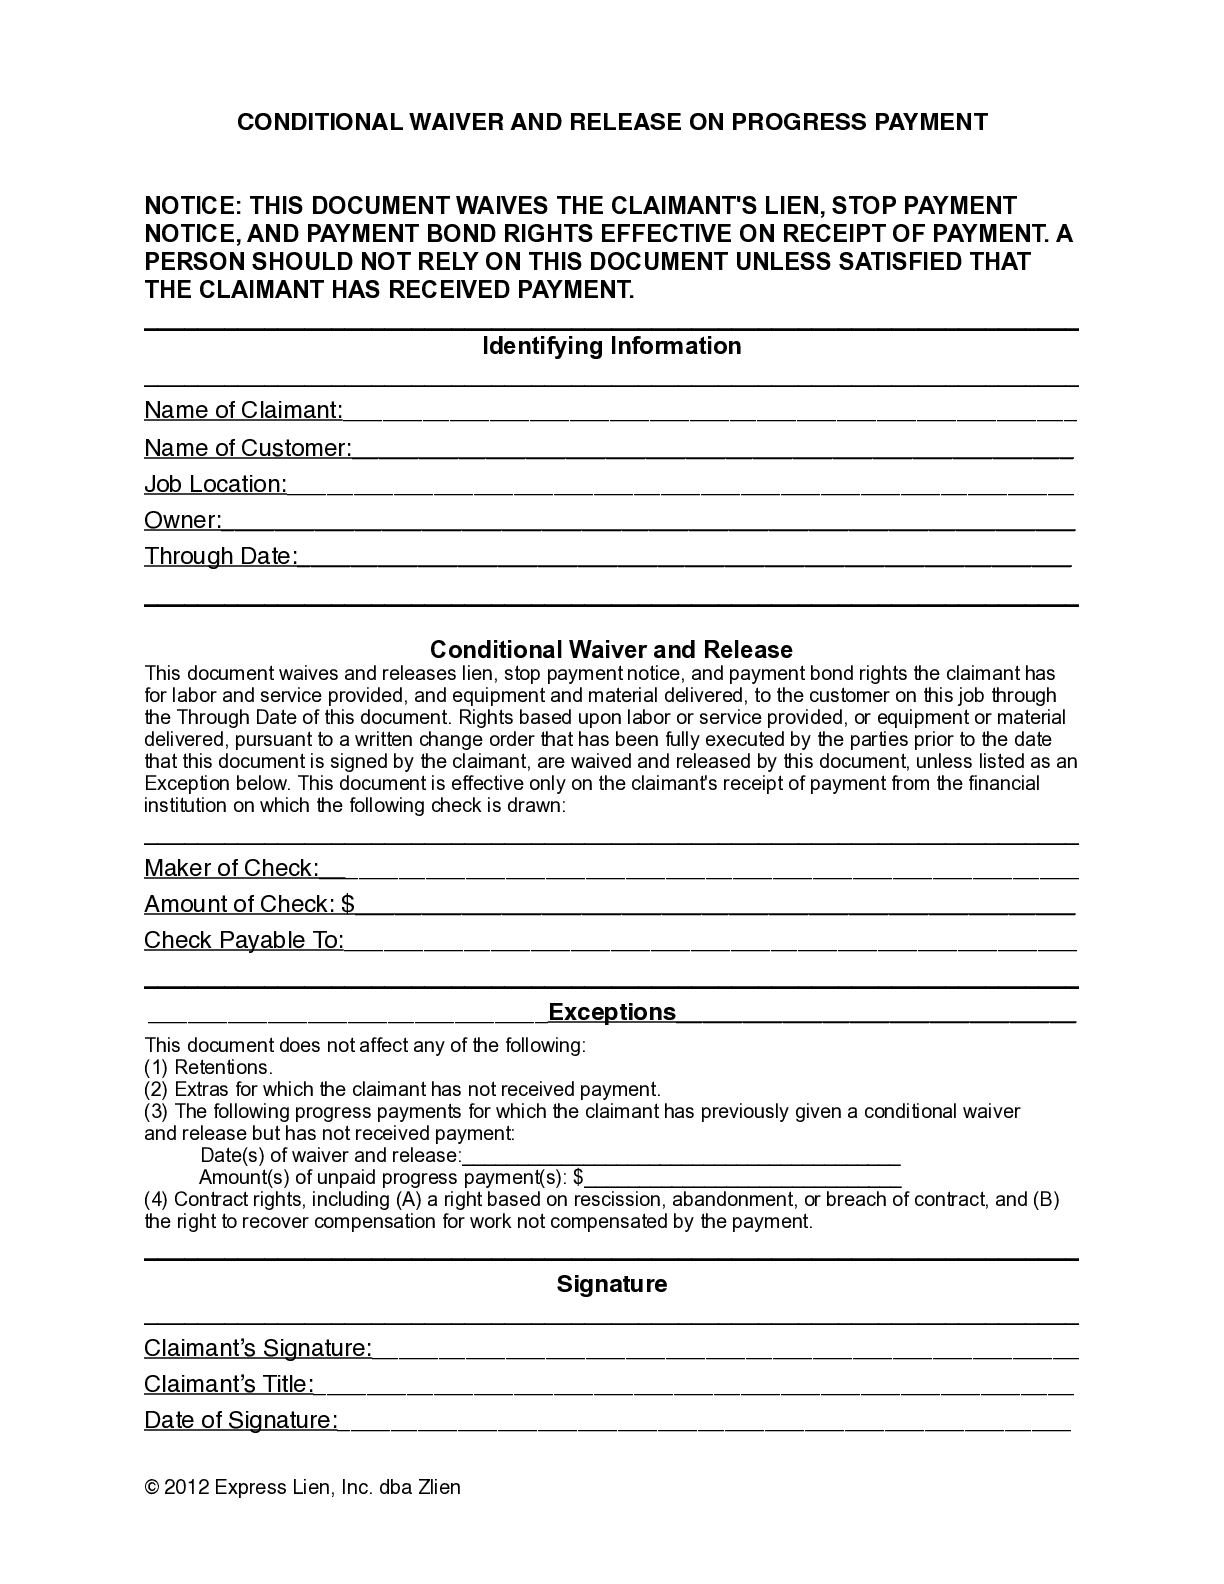 Rhode Island Partial Conditional Lien Waiver Form - free from